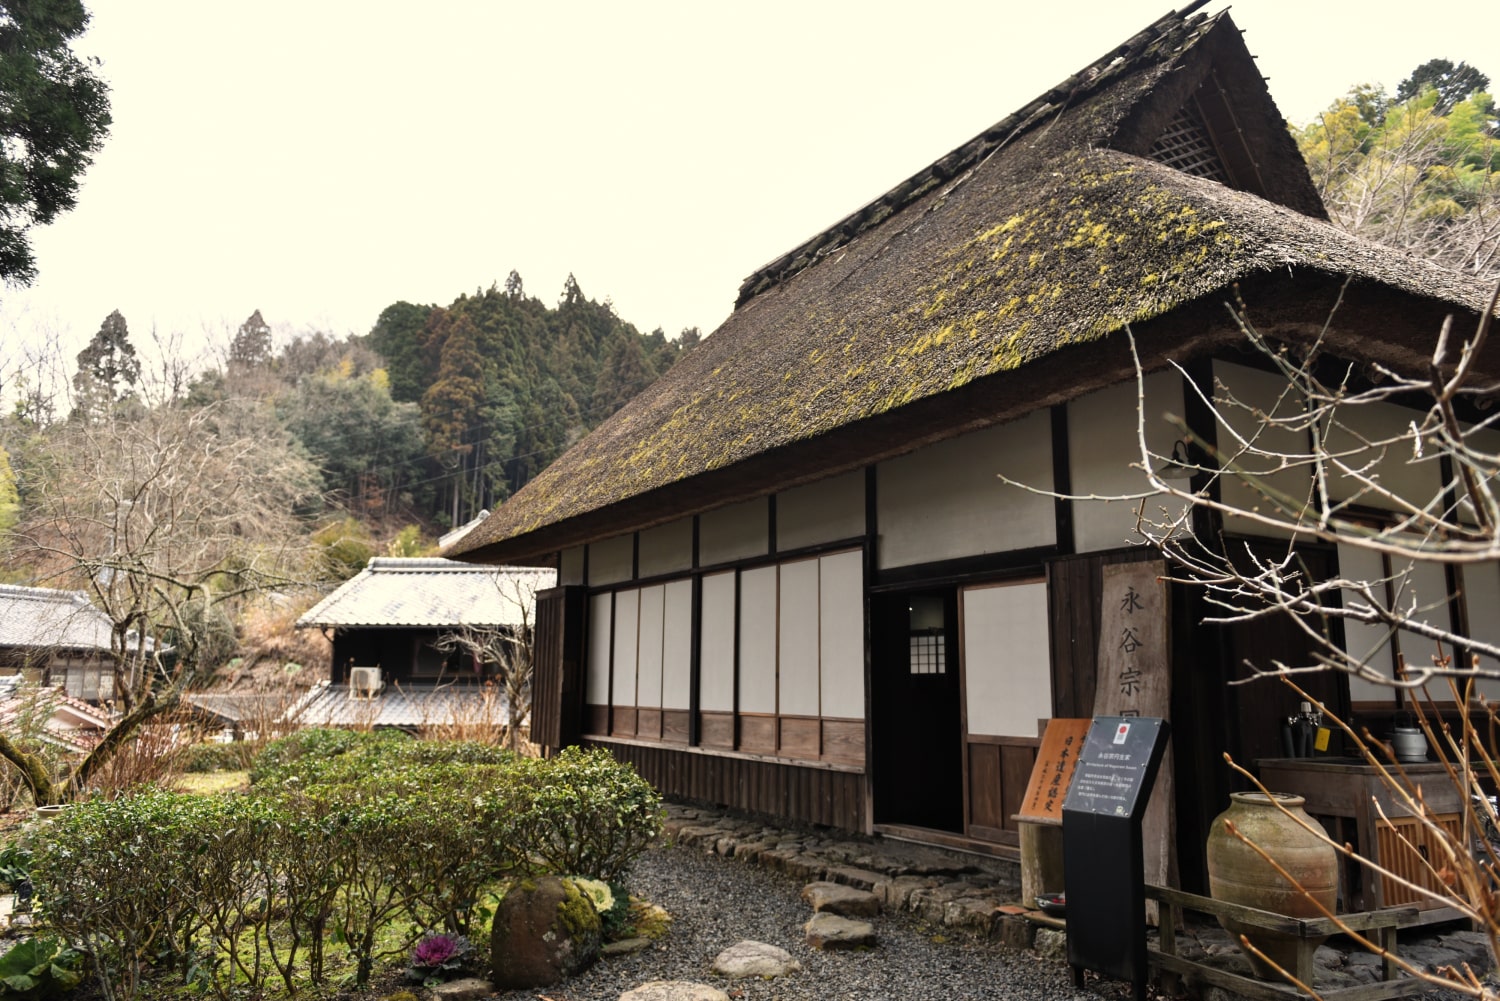 In the restored former residence, there preserved the tea making tools and the traces left by baking oven at that time.